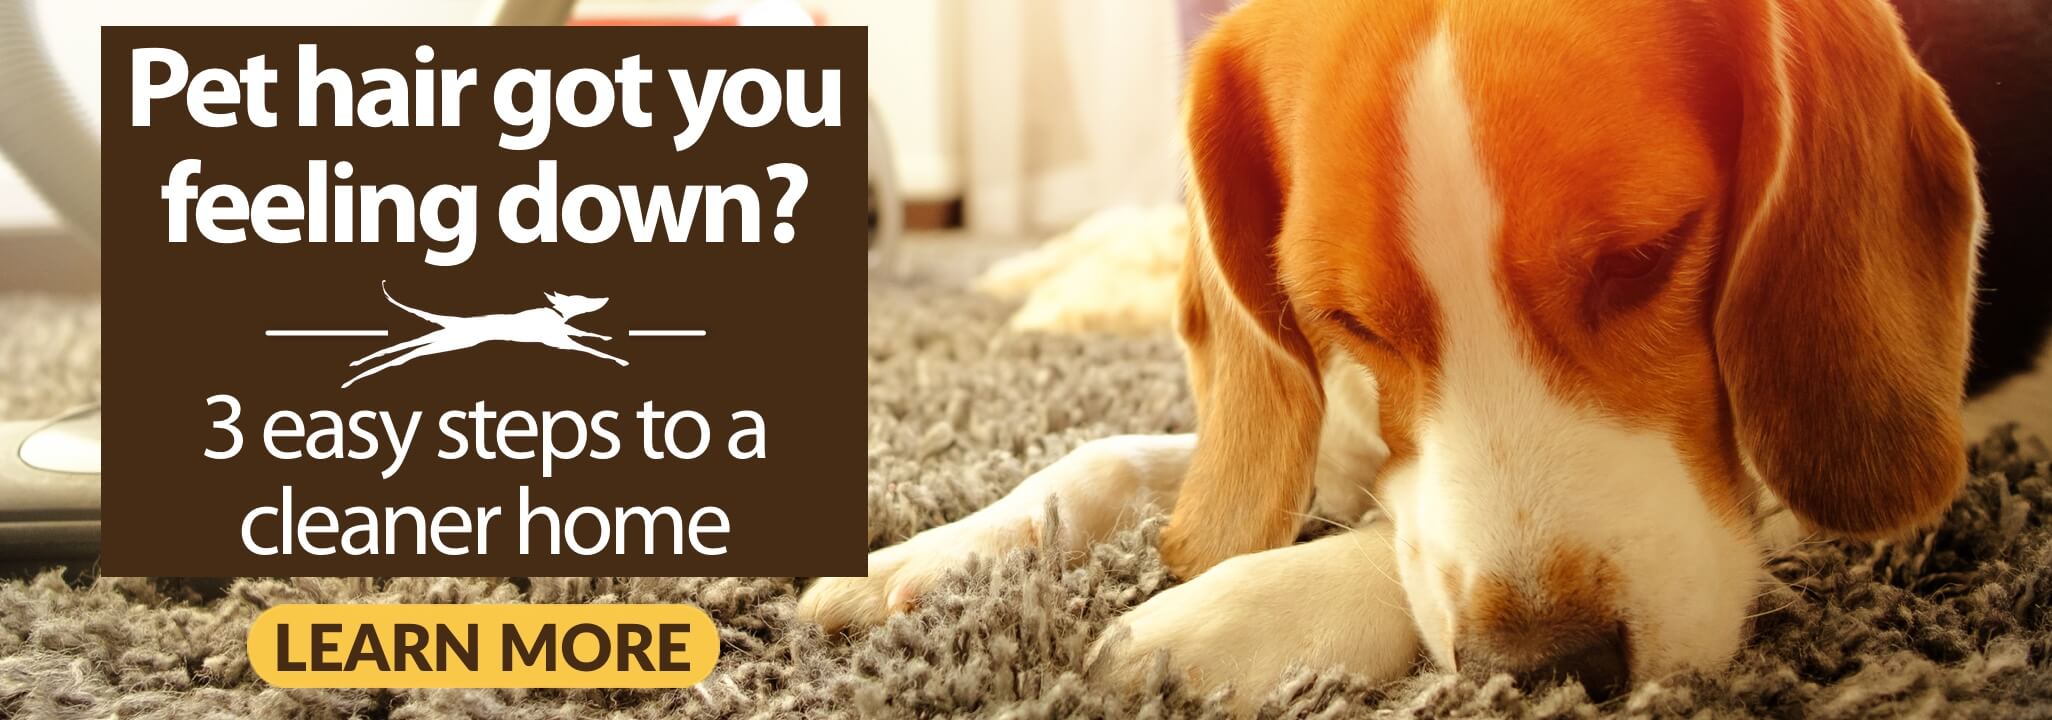 Beagle laying its head down on high pile rug covered in dog hair. Caption reads Pet hair got you feeling down? 3 easy steps to a cleaner home. Learn More